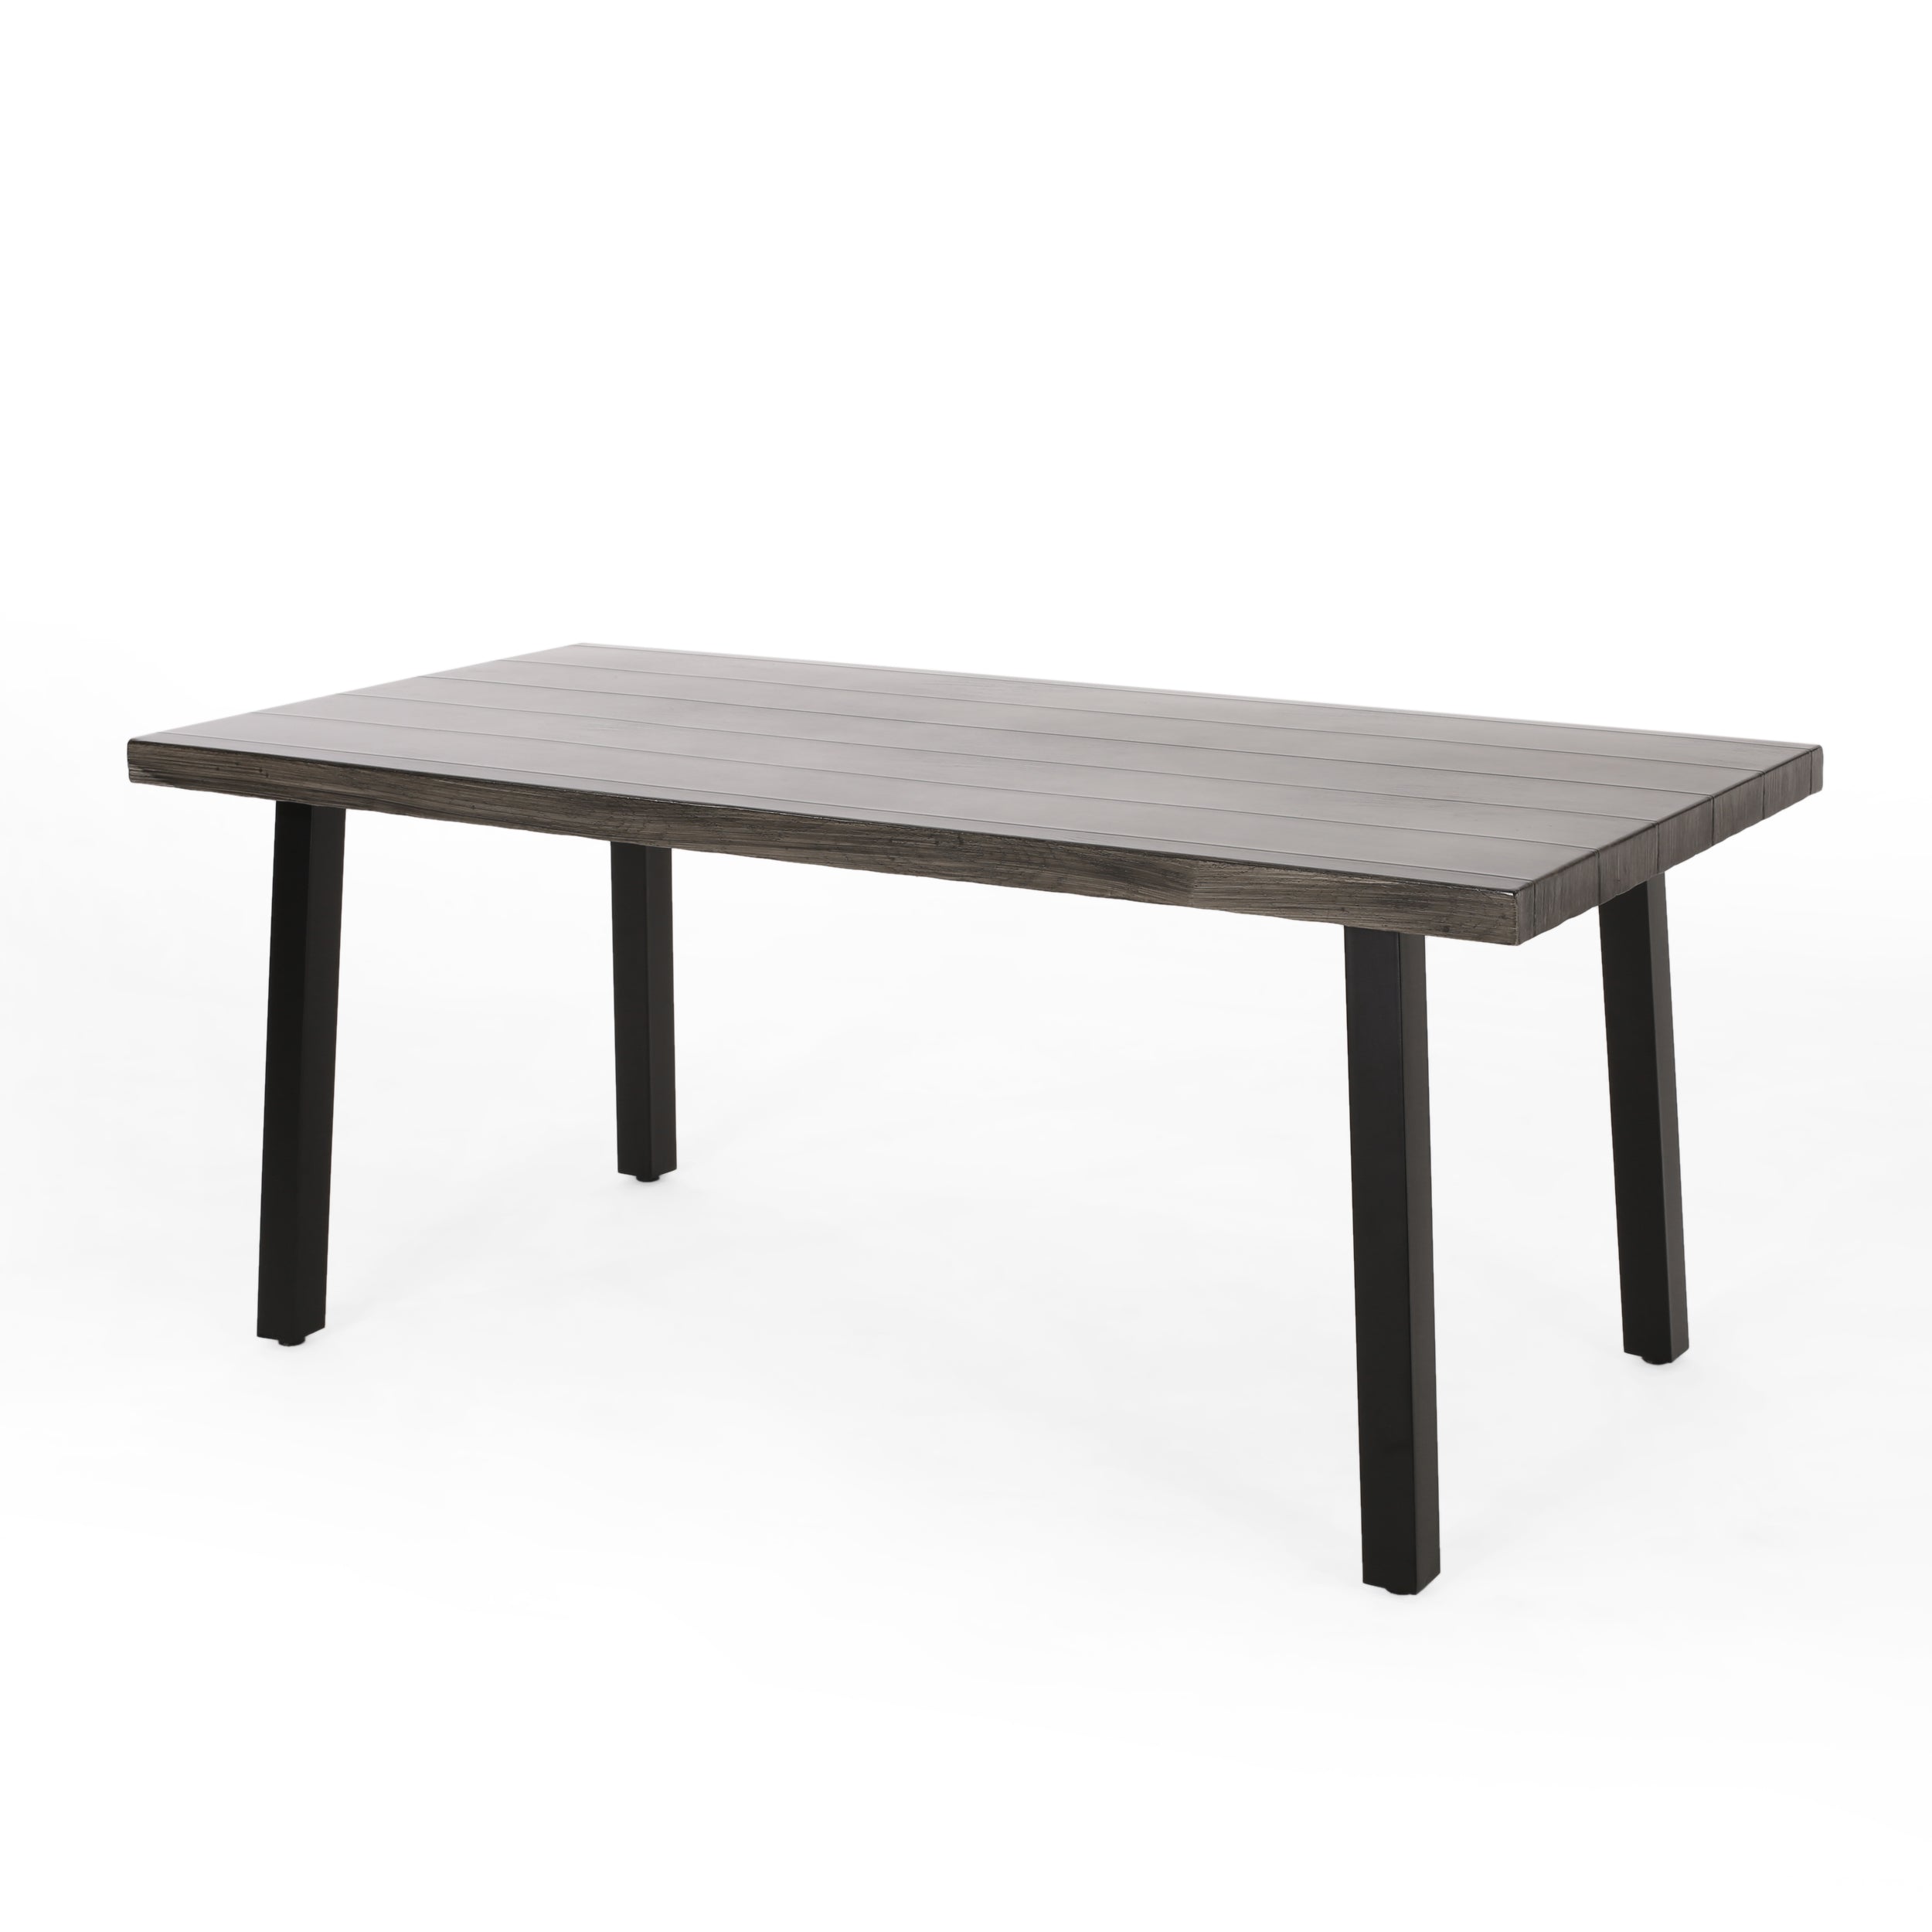 Altair Outdoor Modern Industrial Aluminum Dining Table Default Title